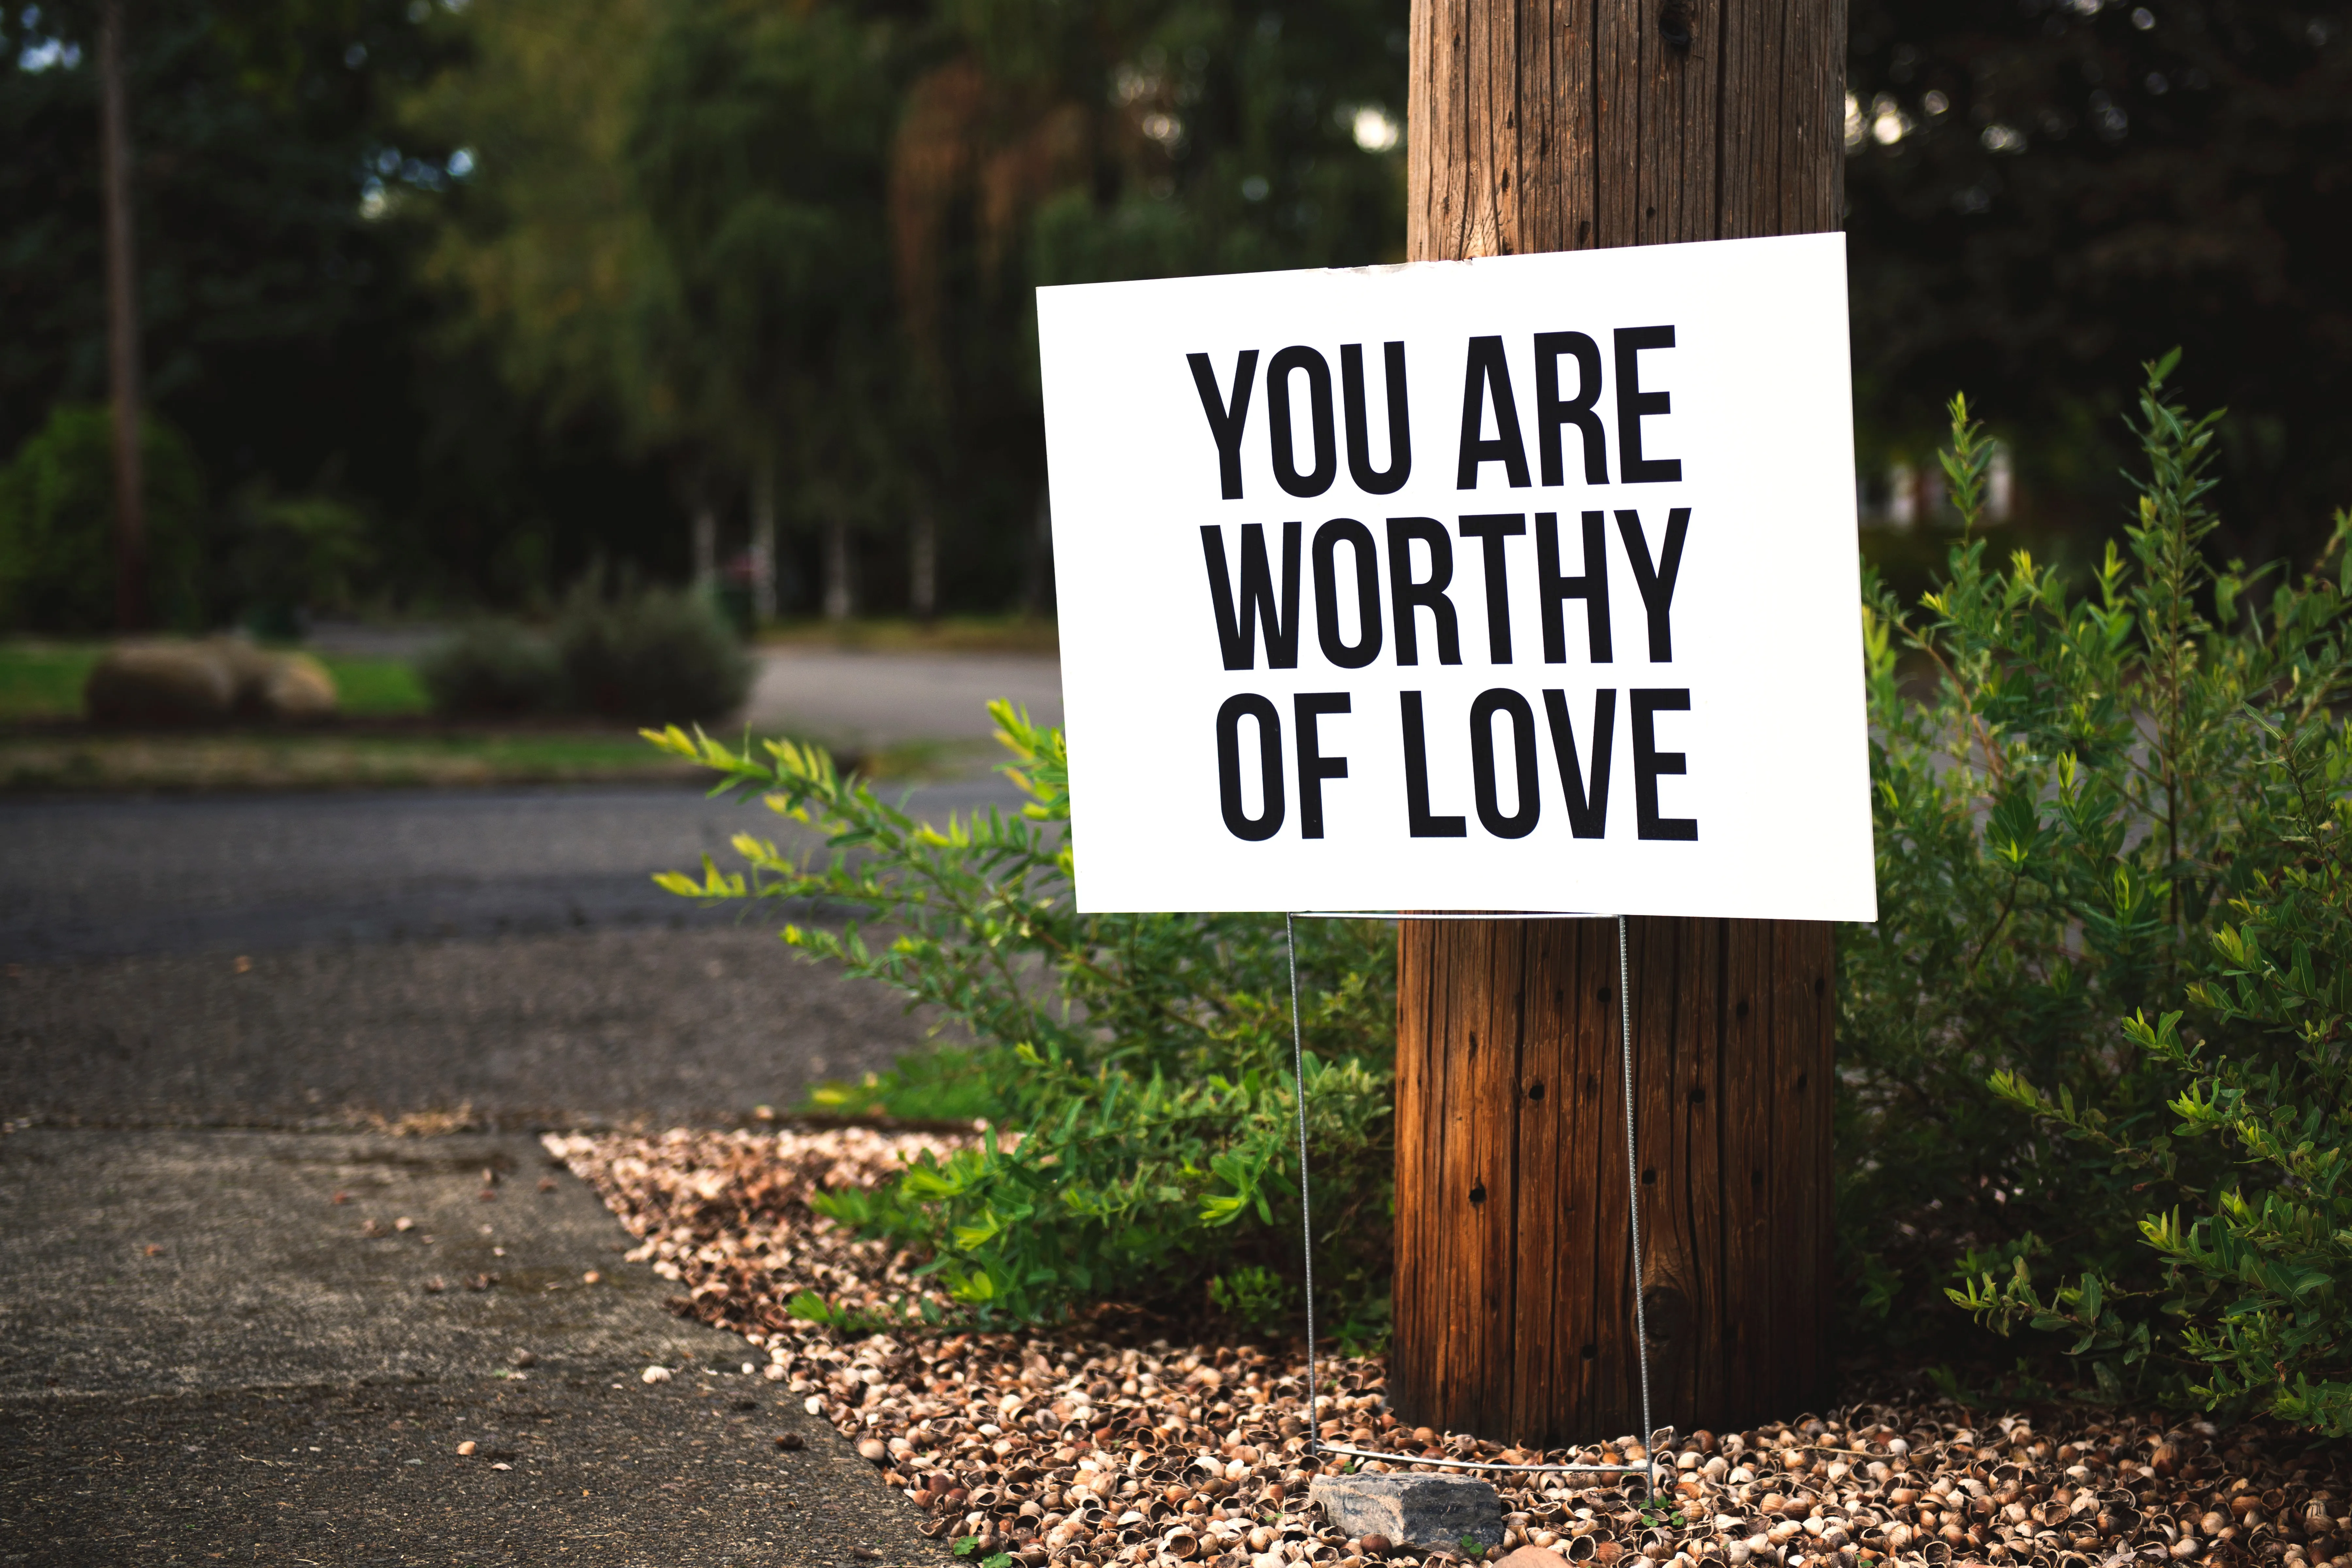 A board on the side of the road saying you are worthy of love